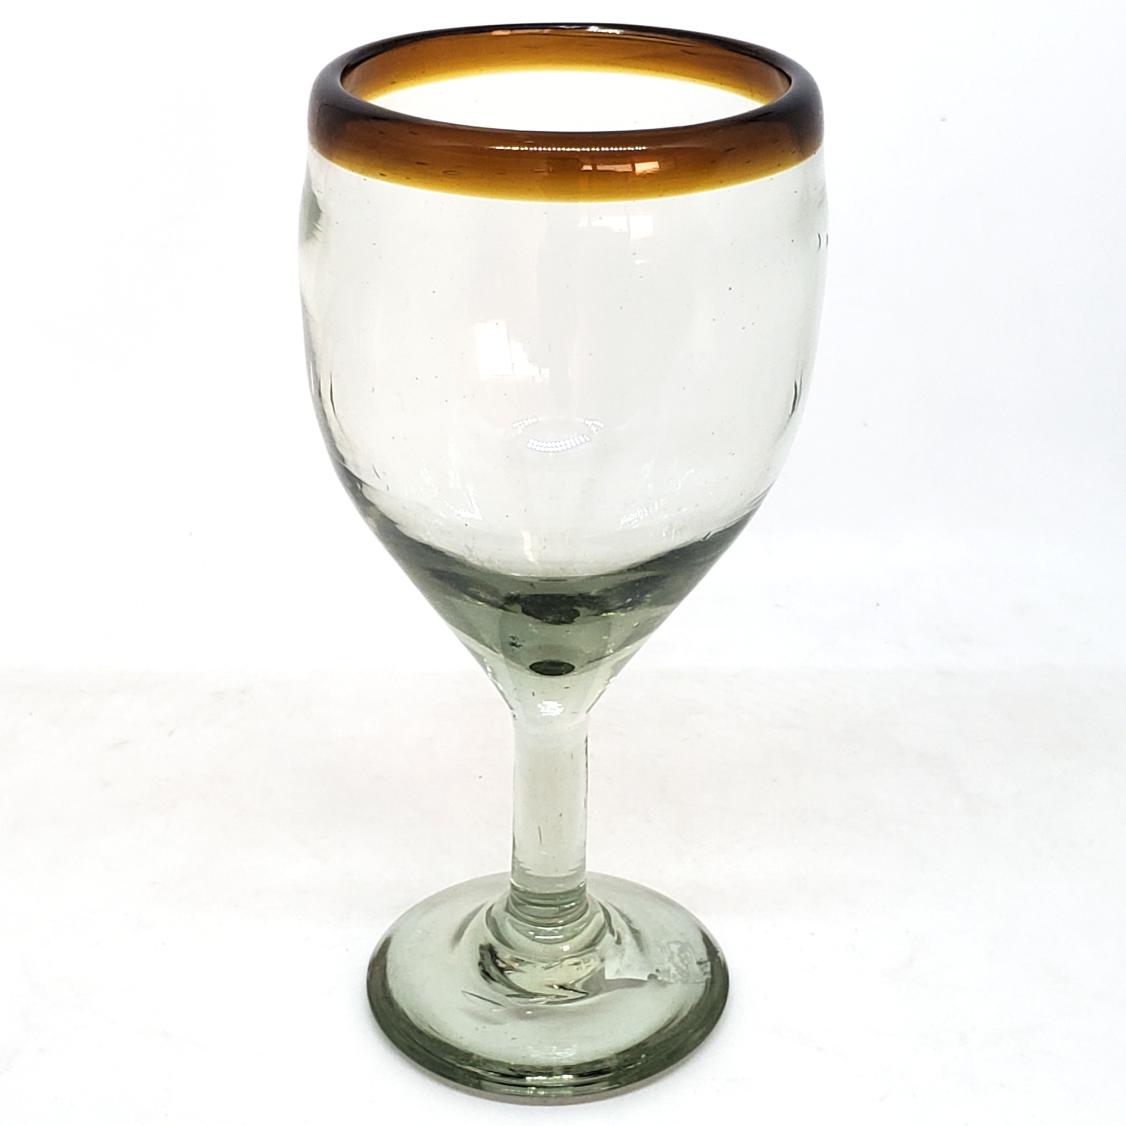 Sale Items / Amber Rim 13 oz Wine Glasses (set of 6) / Capture the bouquet of fine red wine with these wine glasses bordered with a bright, amber rim.